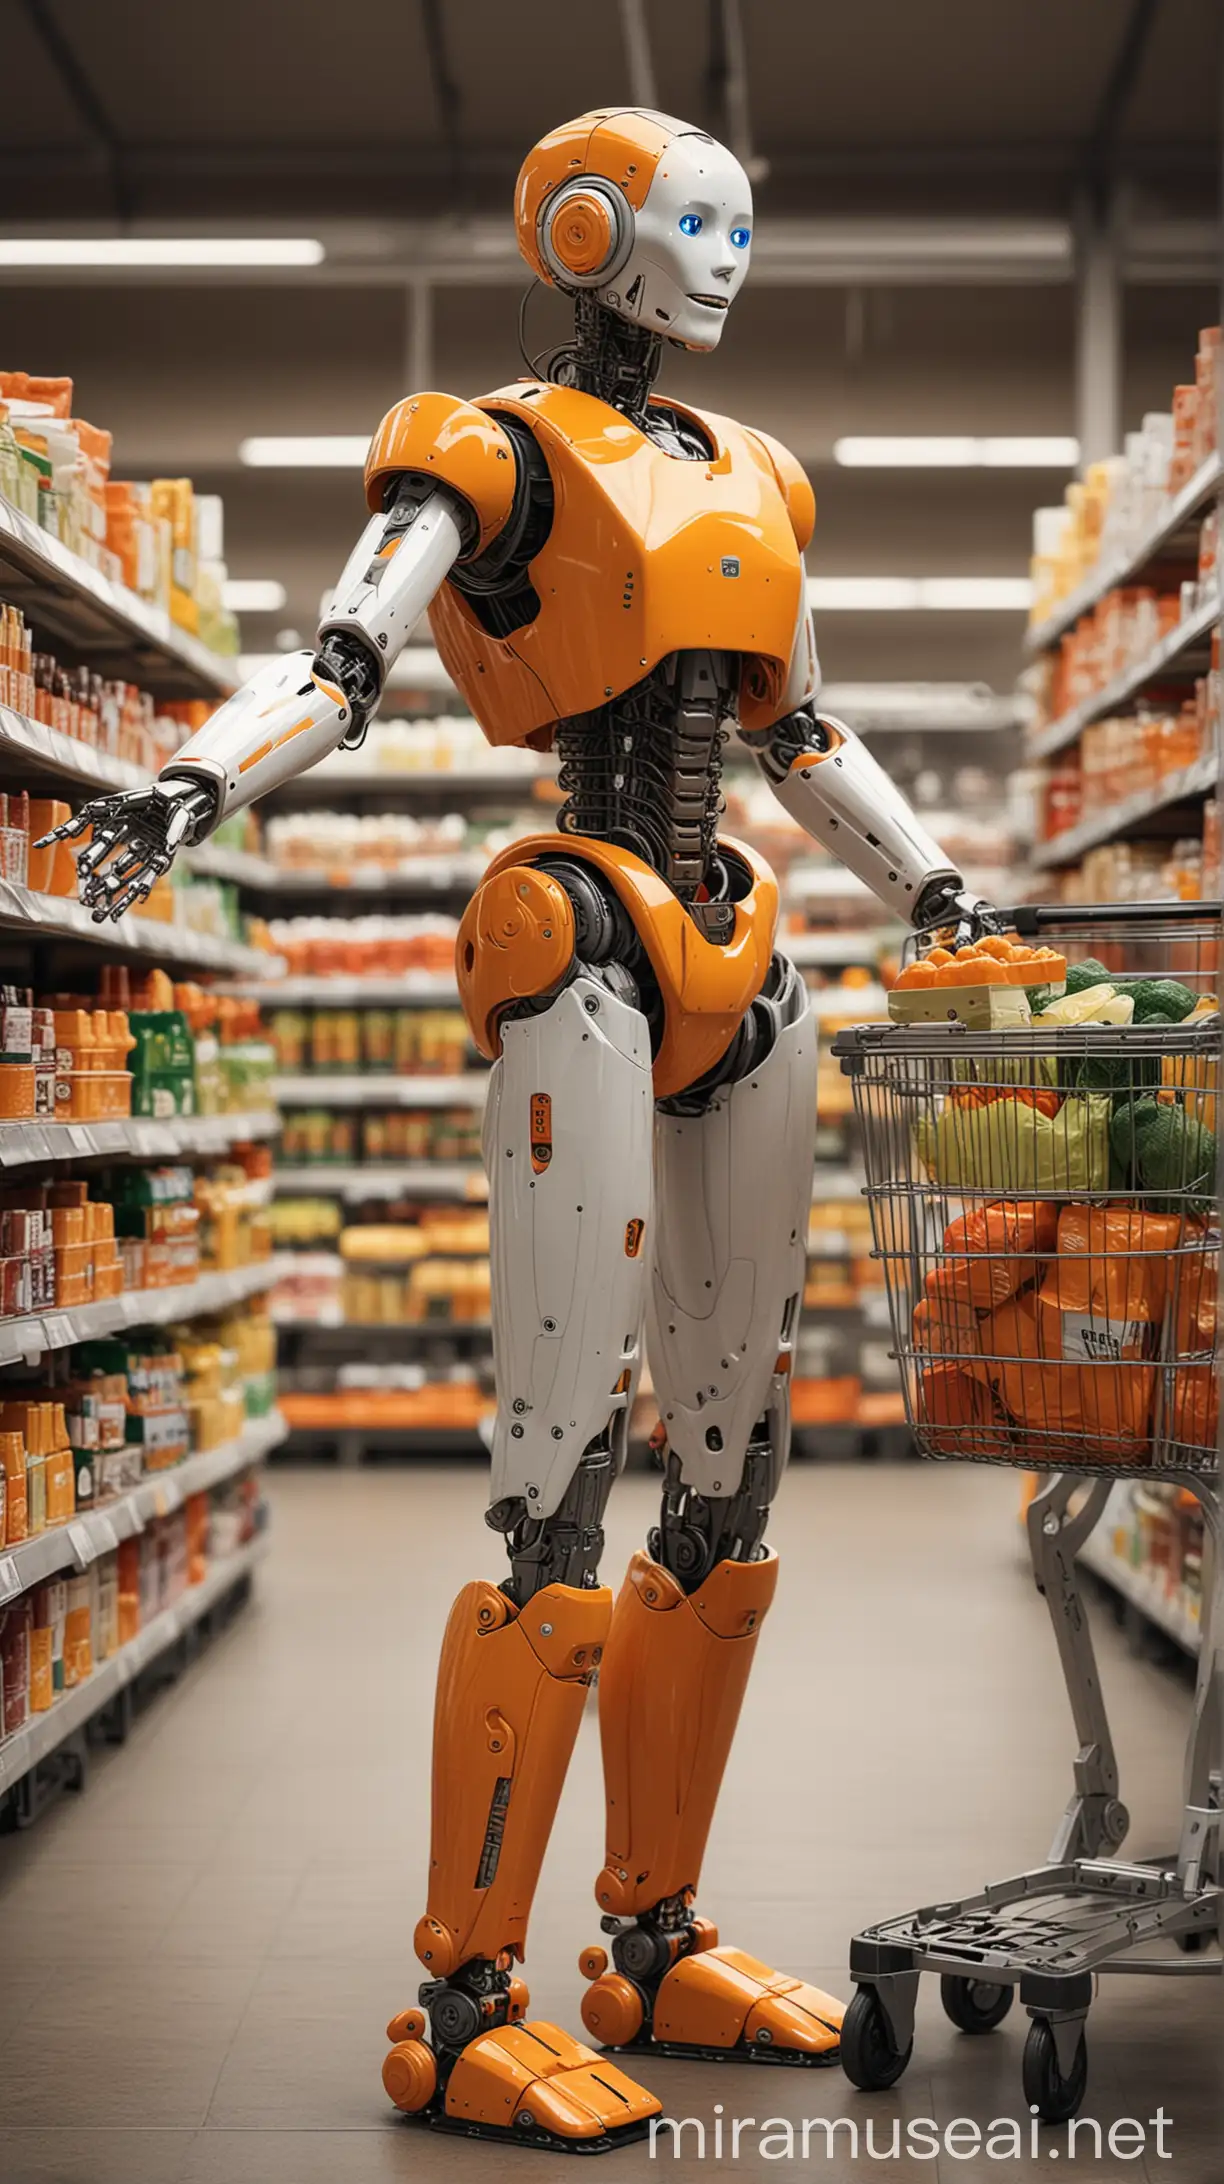 Robotic Grocery Shopping Friendly Robot in Vibrant Orange Gesture